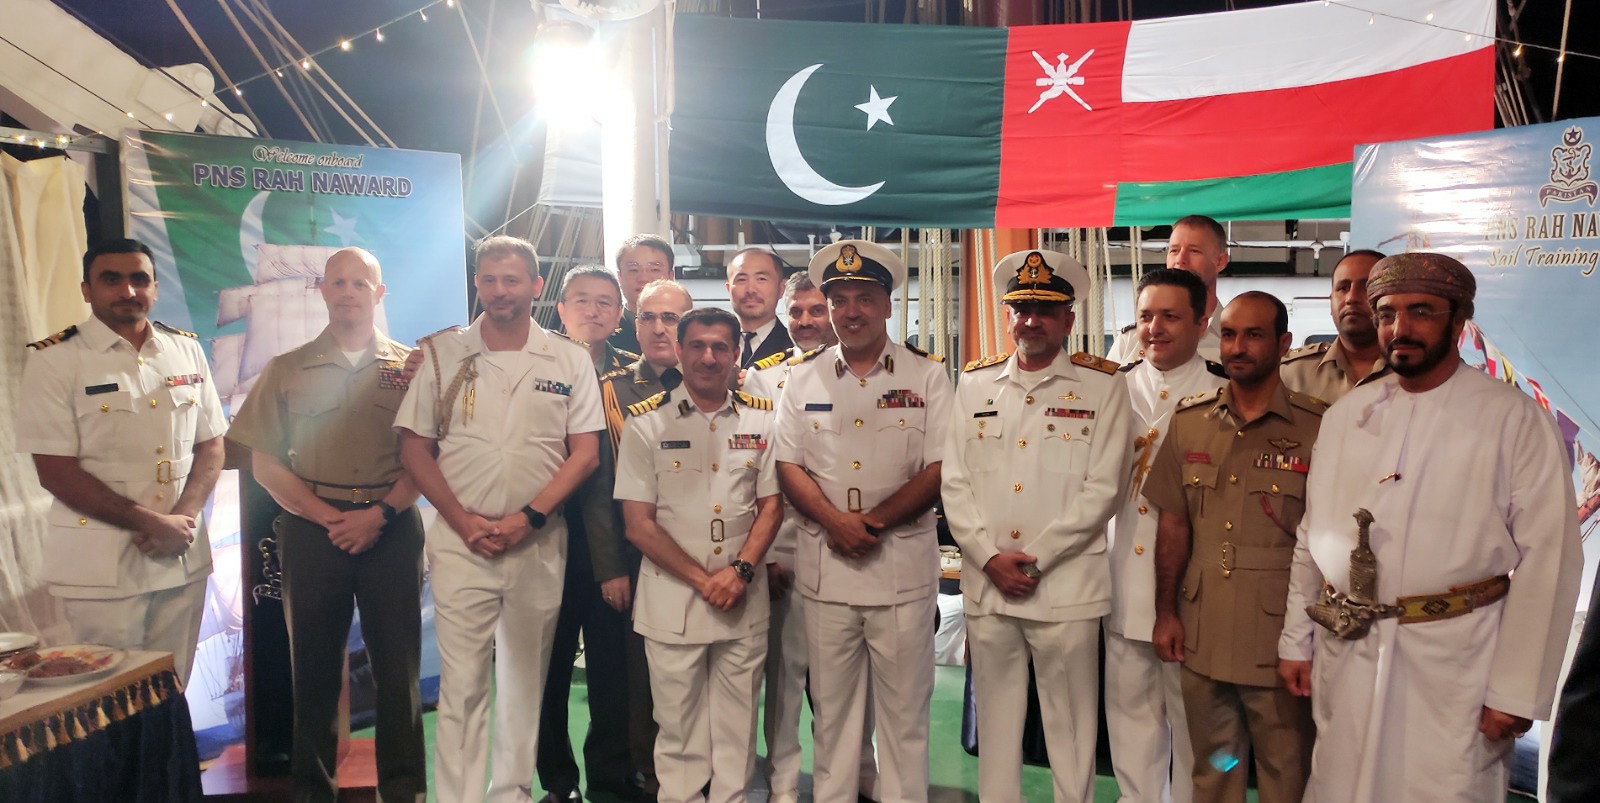 PAKISTAN NAVY SHIPS VISITED OMAN AND IRAN DURING OVERSEAS DEPLOYMENT.